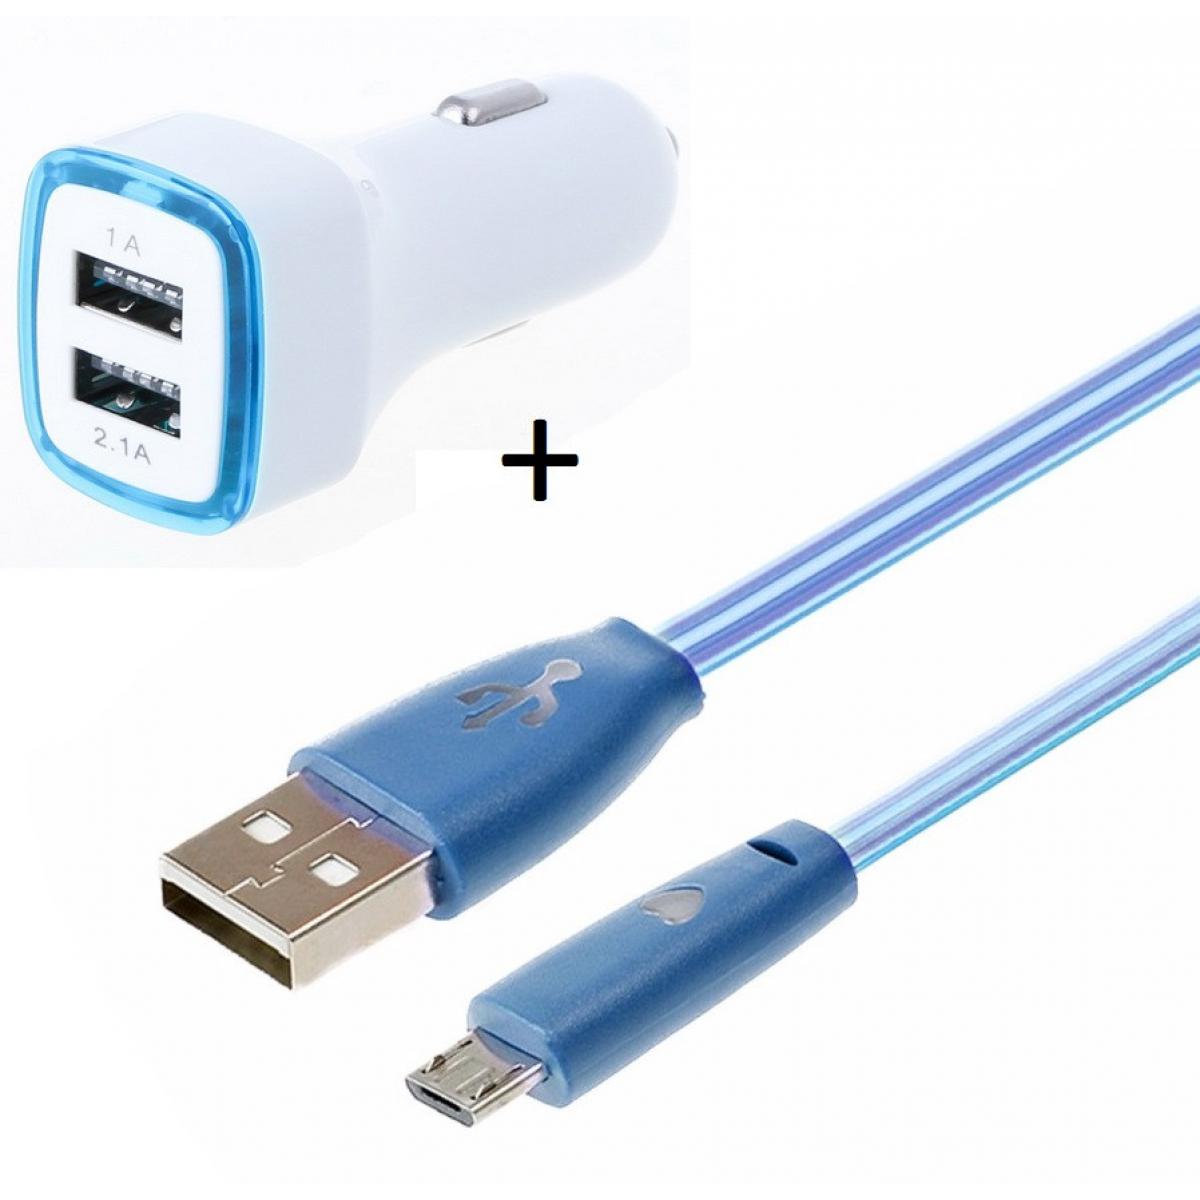 Shot - Pack Chargeur Voiture pour "IPHONE 12 Mini" Lightning (Cable Smiley + Double Adaptateur LED Allume Cigare) (BLEU) - Chargeur Voiture 12V